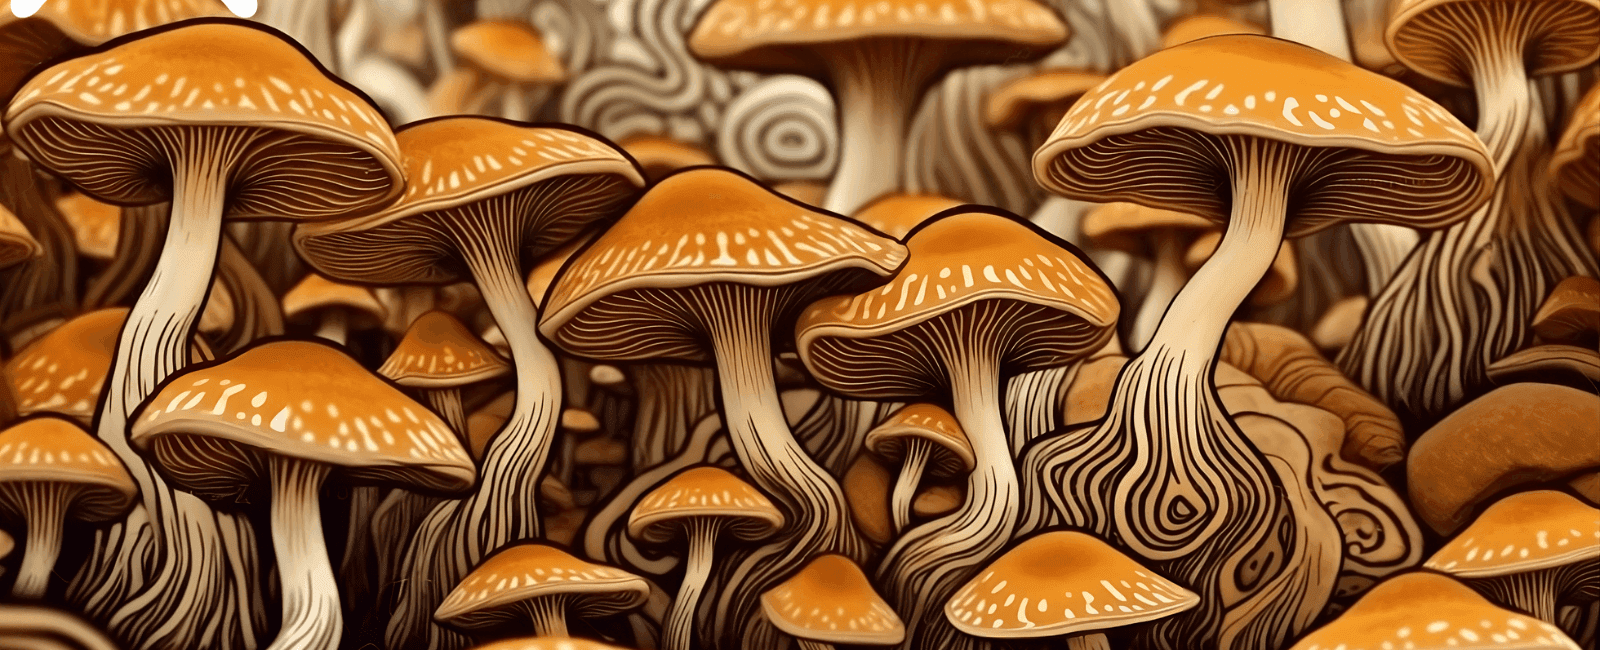 Oregon Launches First Psilocybin Service Center in the Nation, Thousands on Waitlist